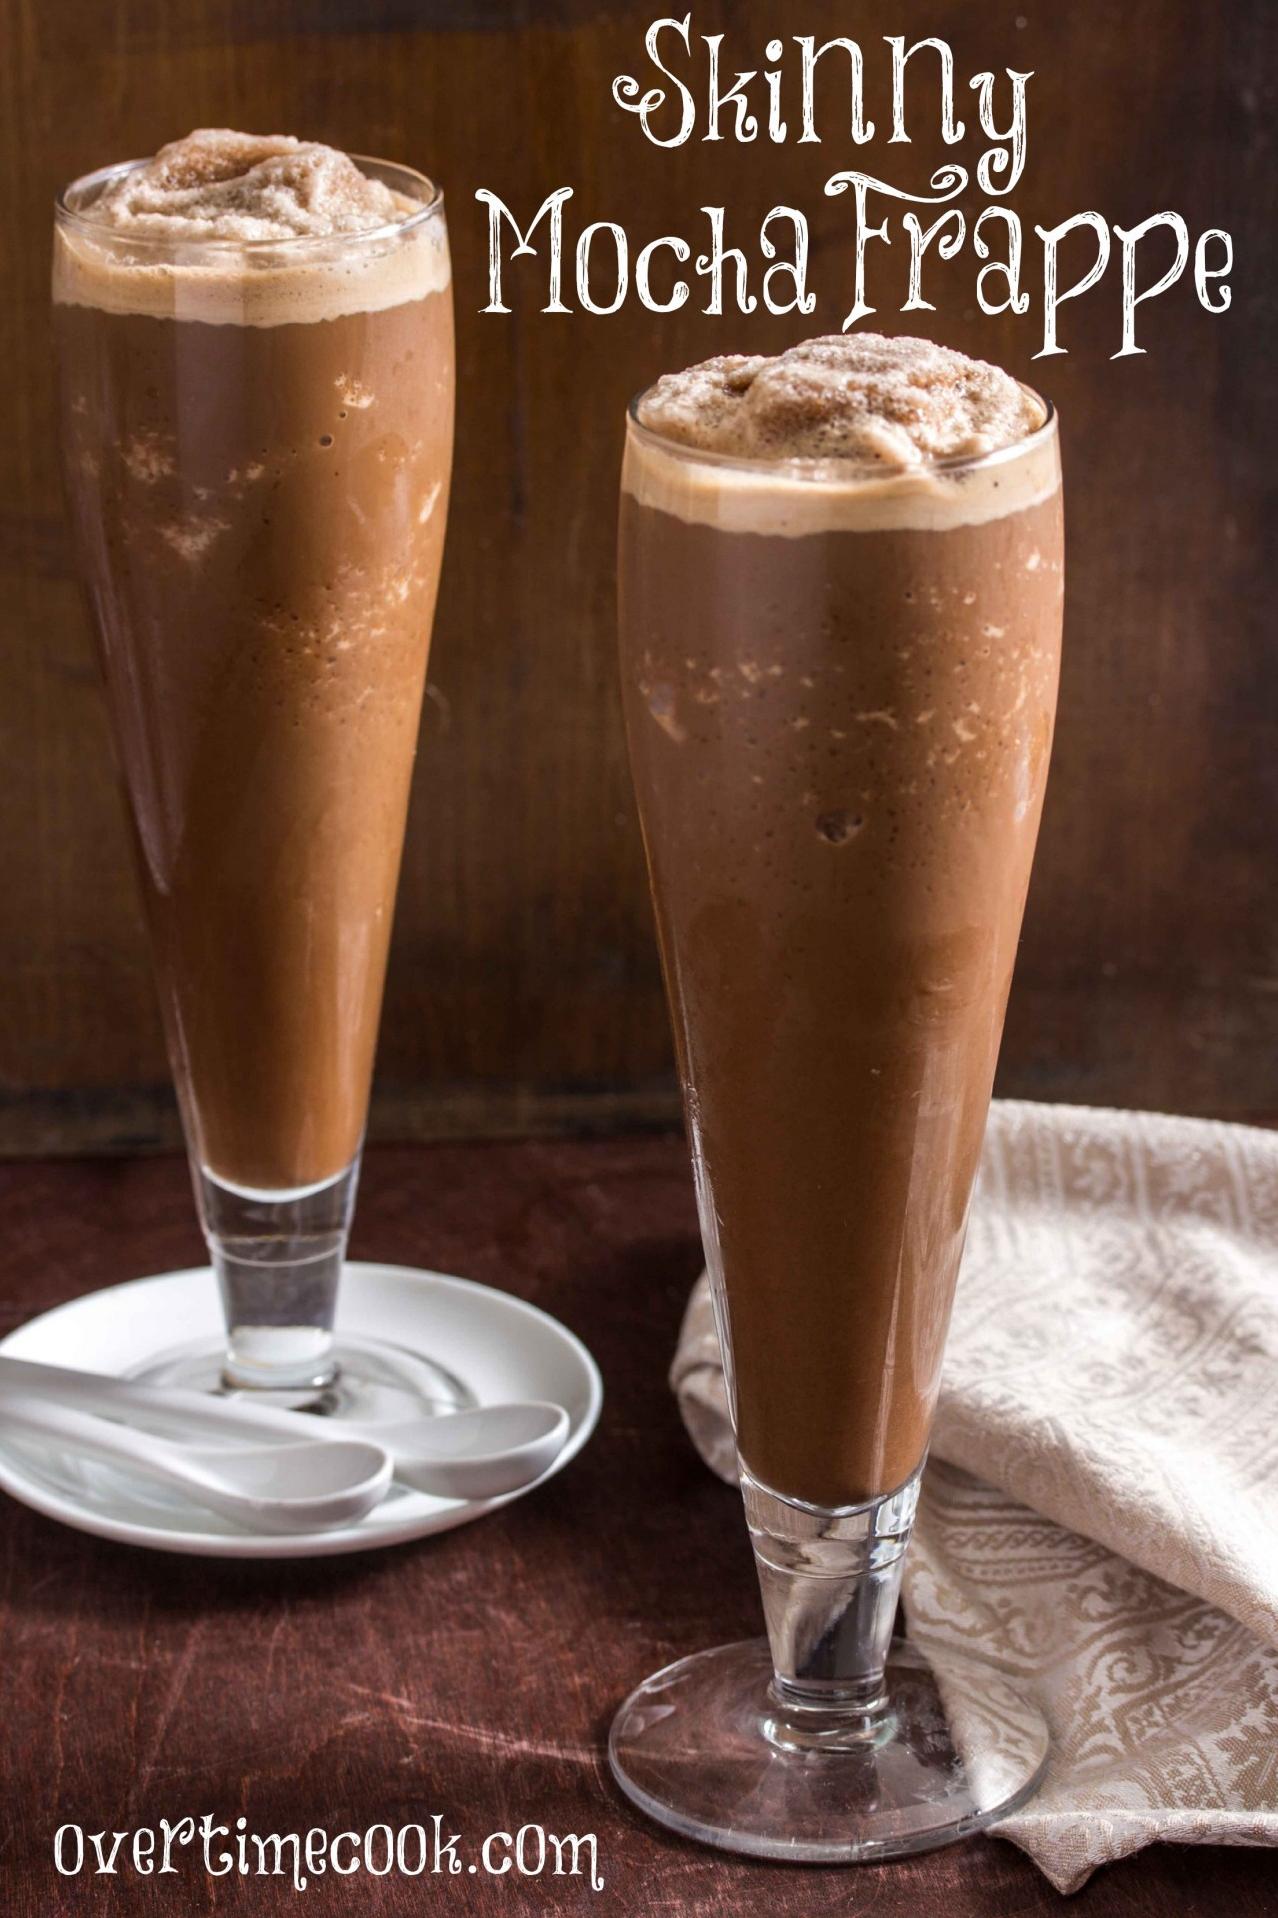  Add a pop of sweetness to your day with this delicious coffee treat.